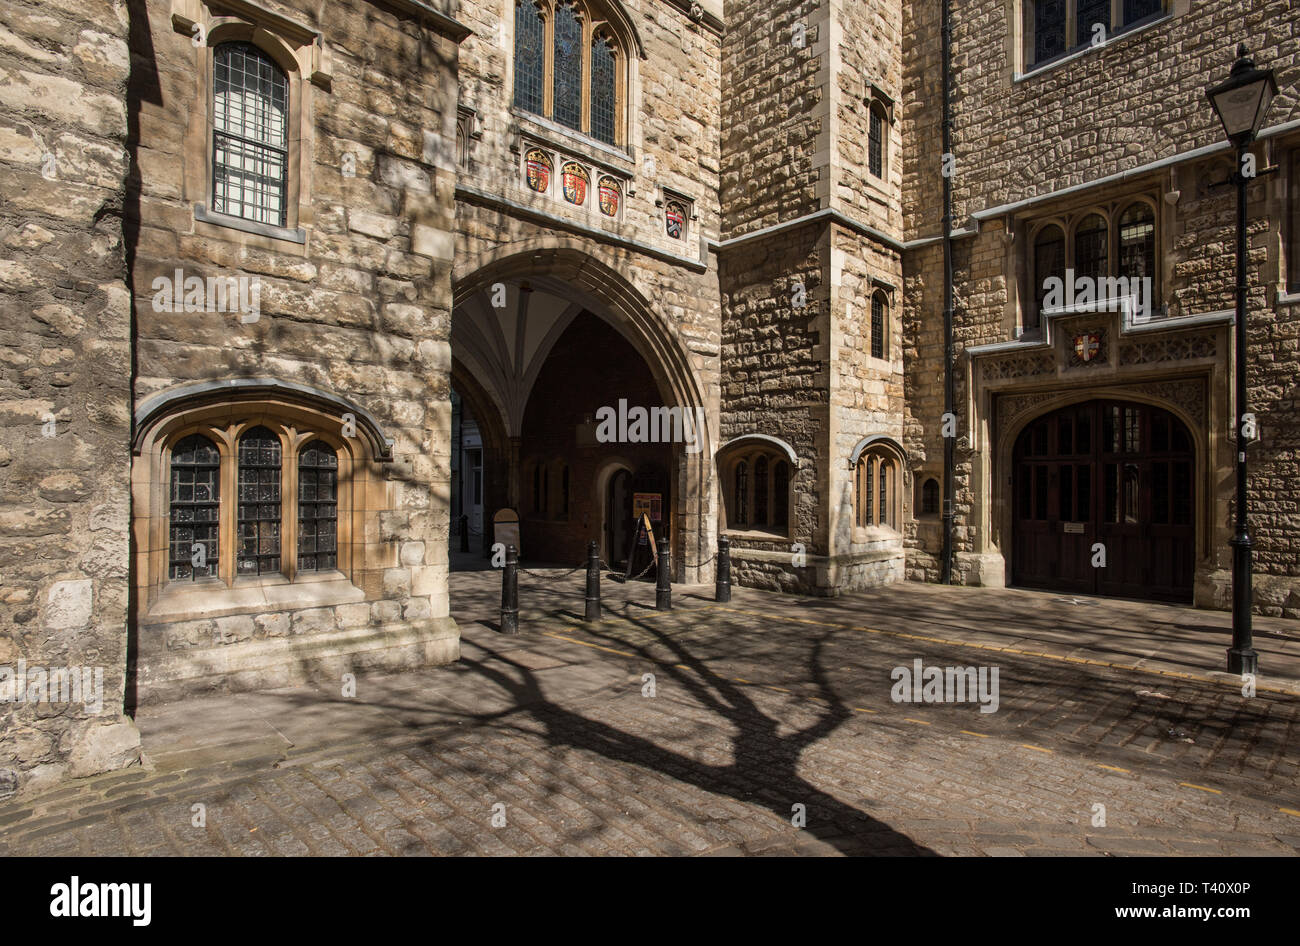 London England. St John's Gate, Clerkenwell London. April 2019 St John's Gate, in the Clerkenwell area of London, is one of the few tangible remains f Stock Photo